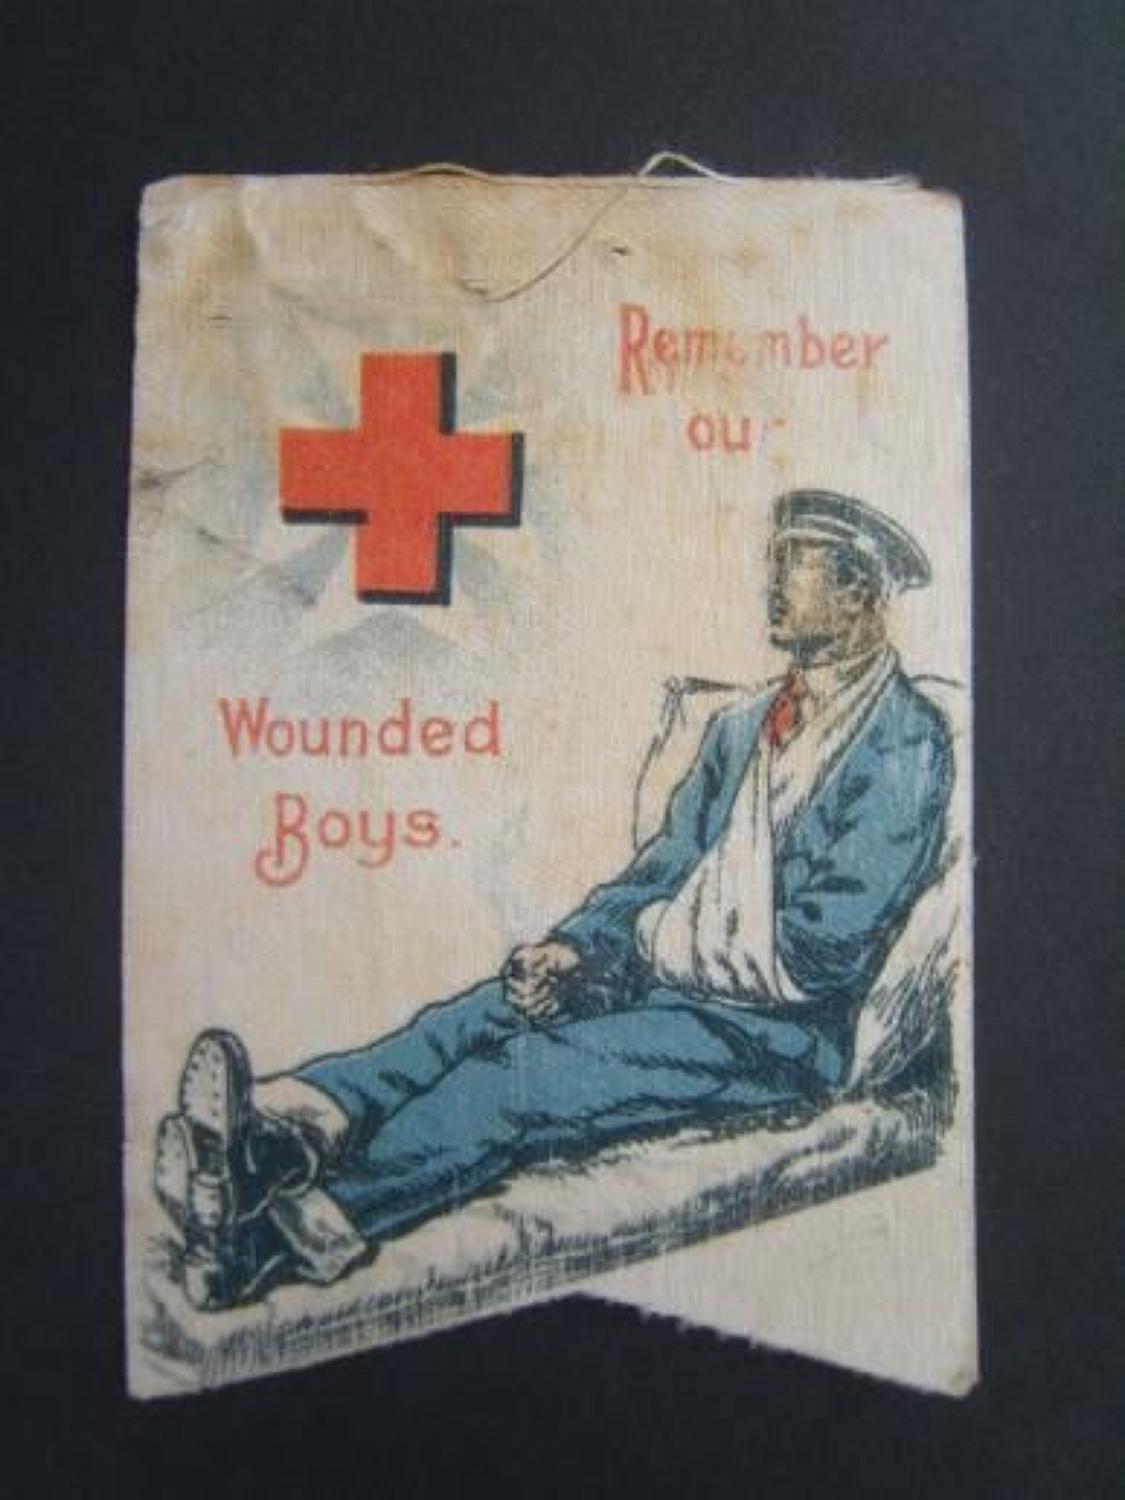 Remember our wounded boys